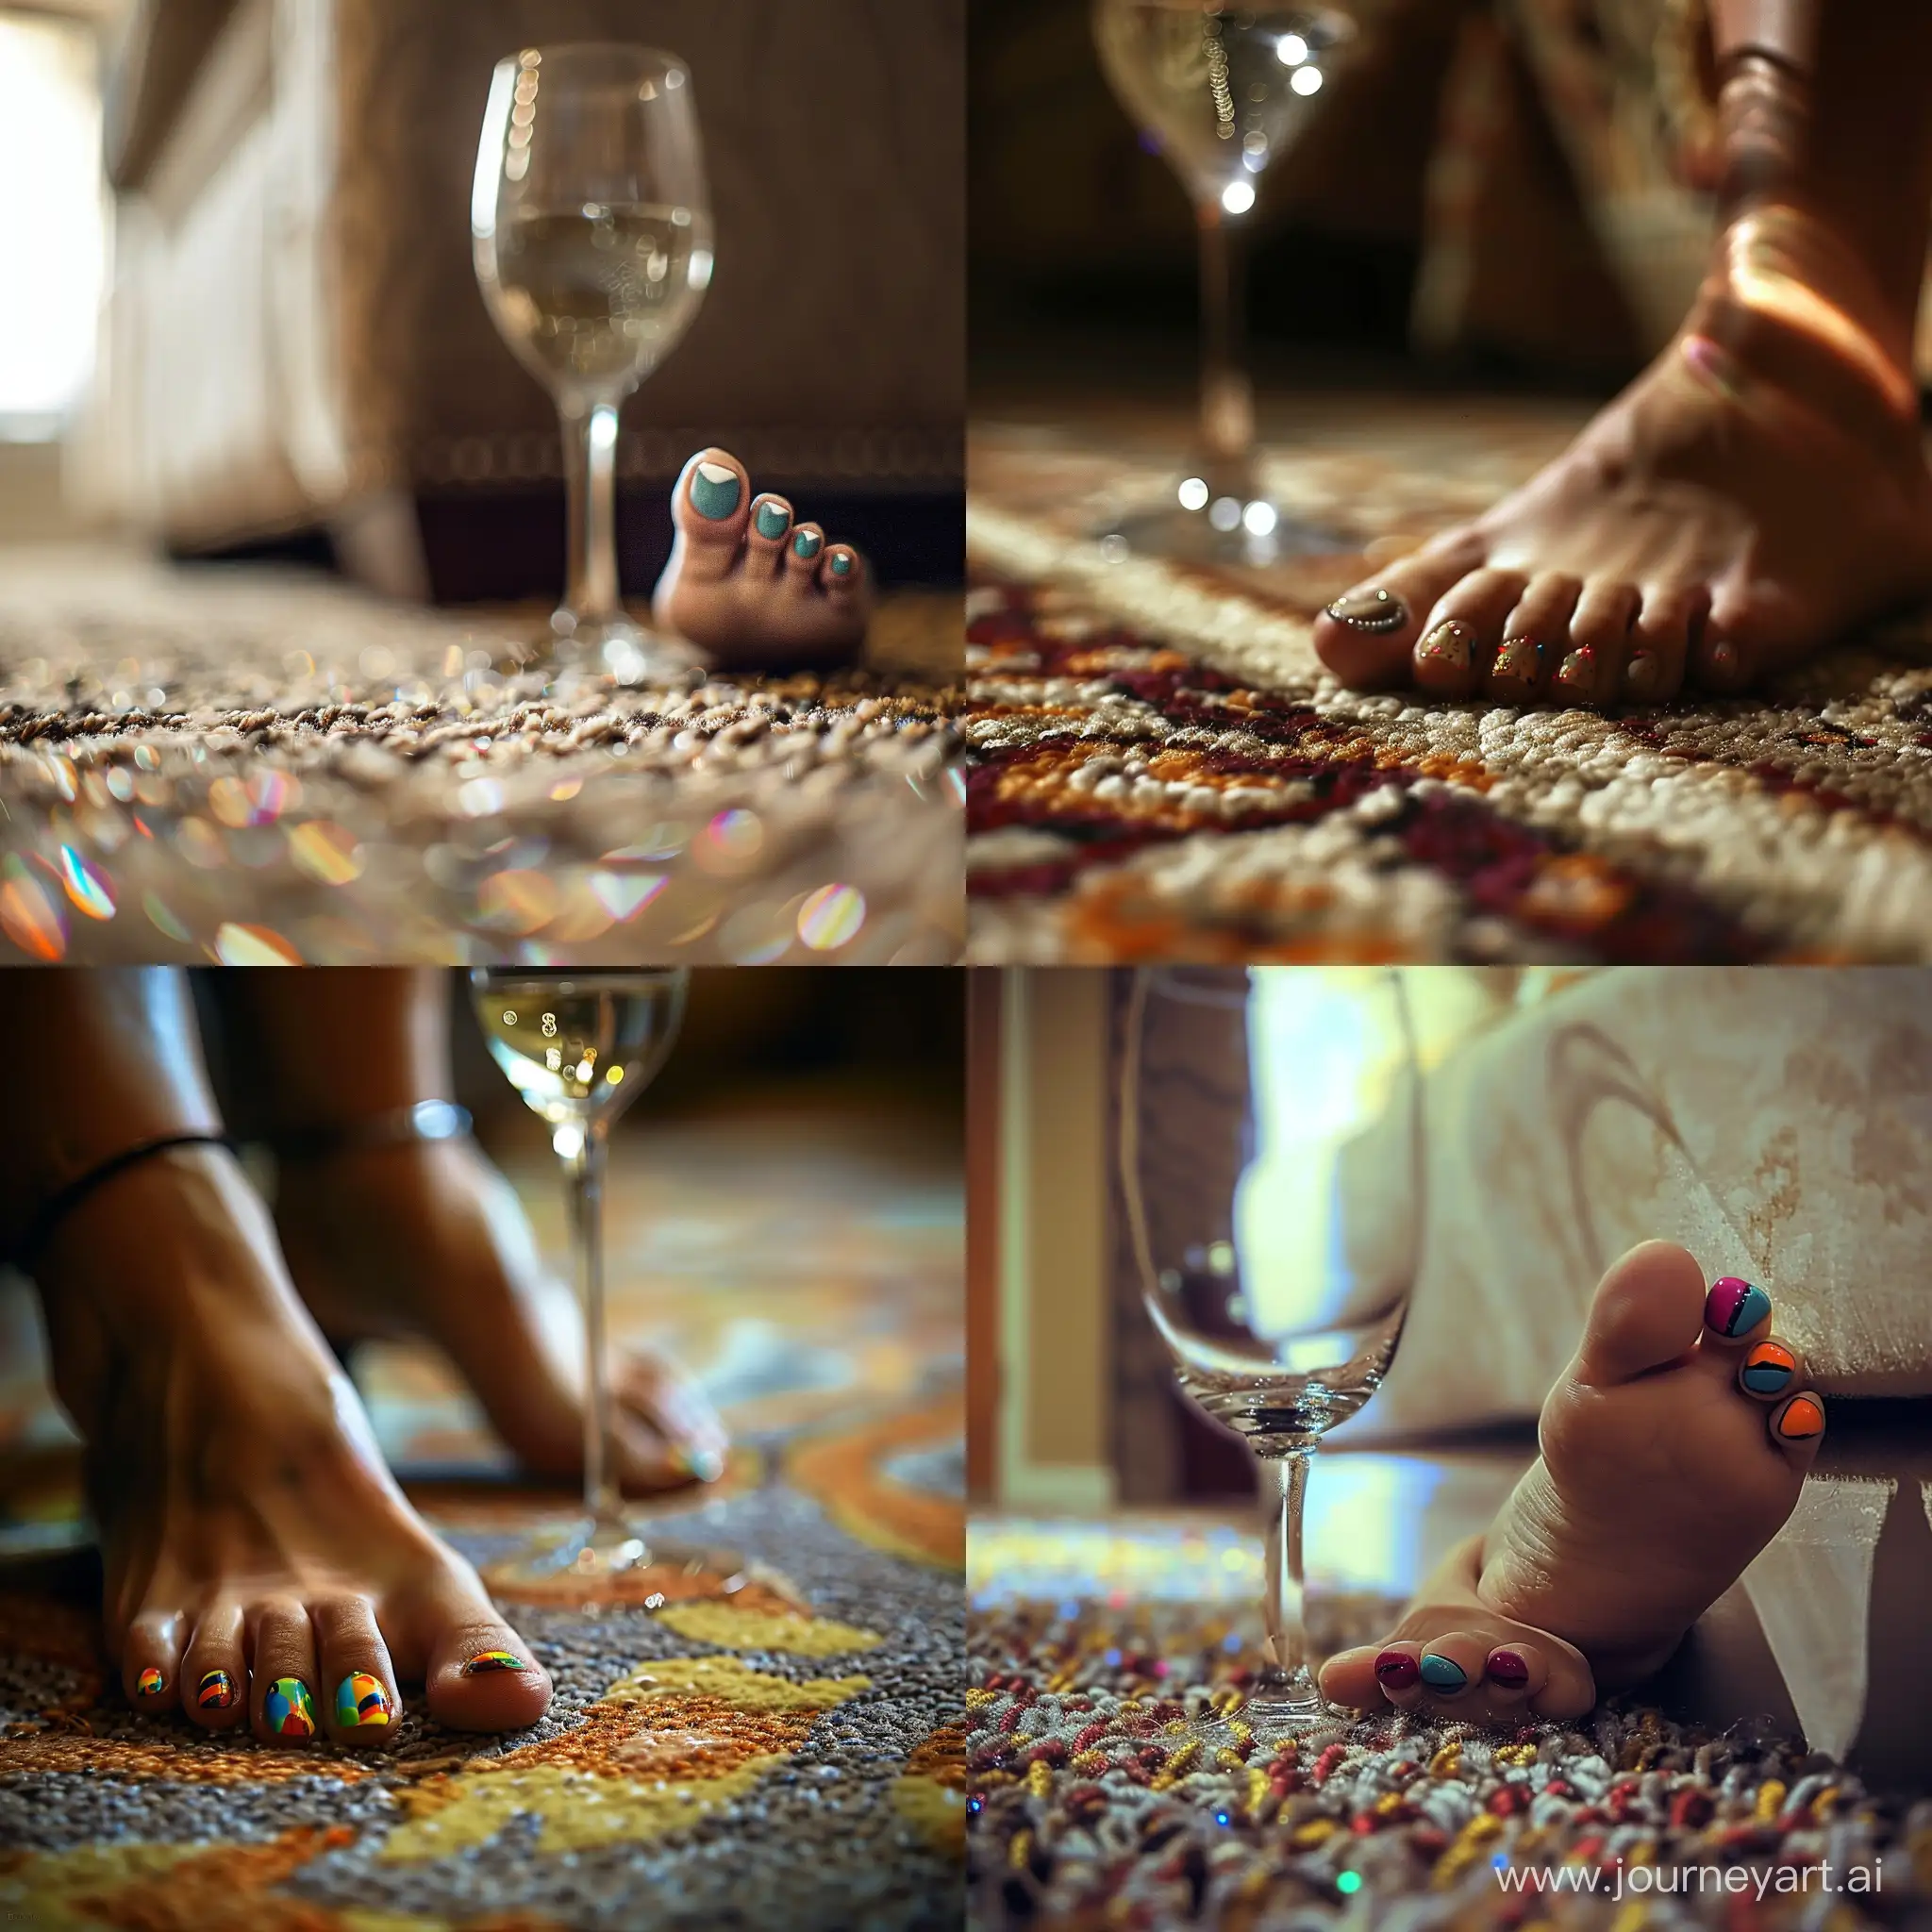 Relaxing-Evening-with-Painted-Toenails-and-Wine-Glass-on-Carpeted-Floor